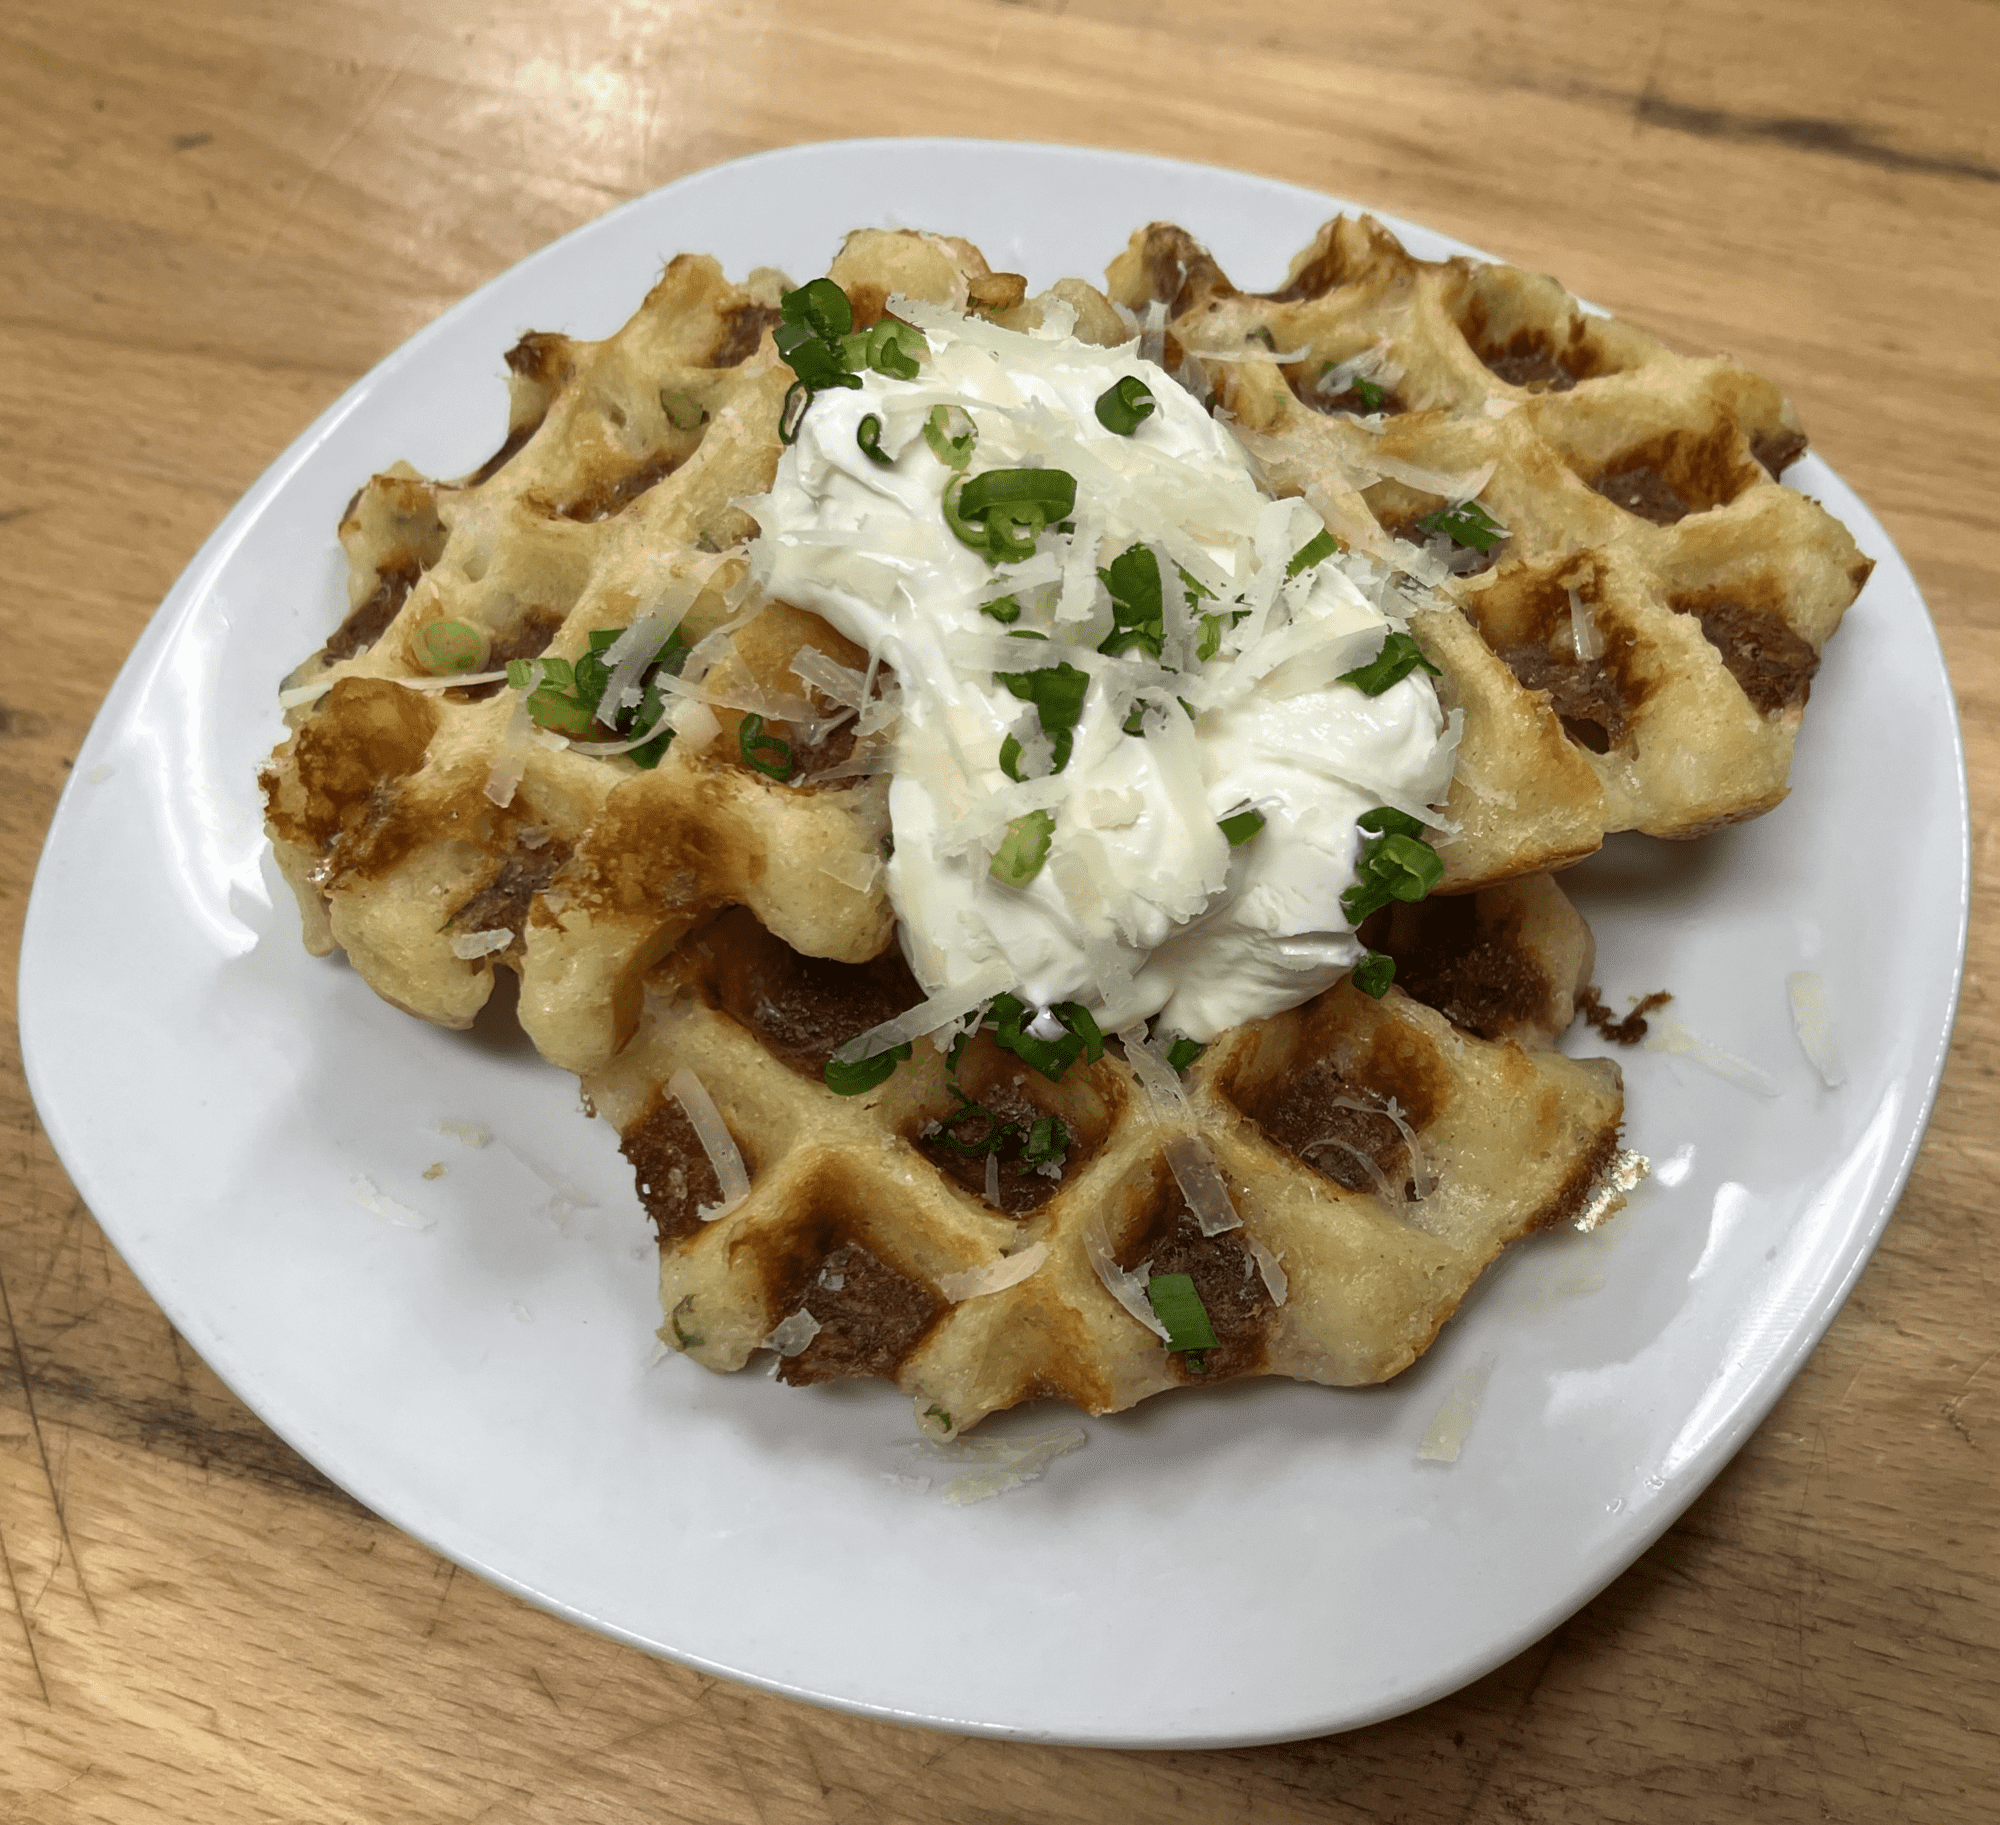 Mashed Potato Waffles with Sour Cream, Sliced Scallions, and Shredded Parmesan